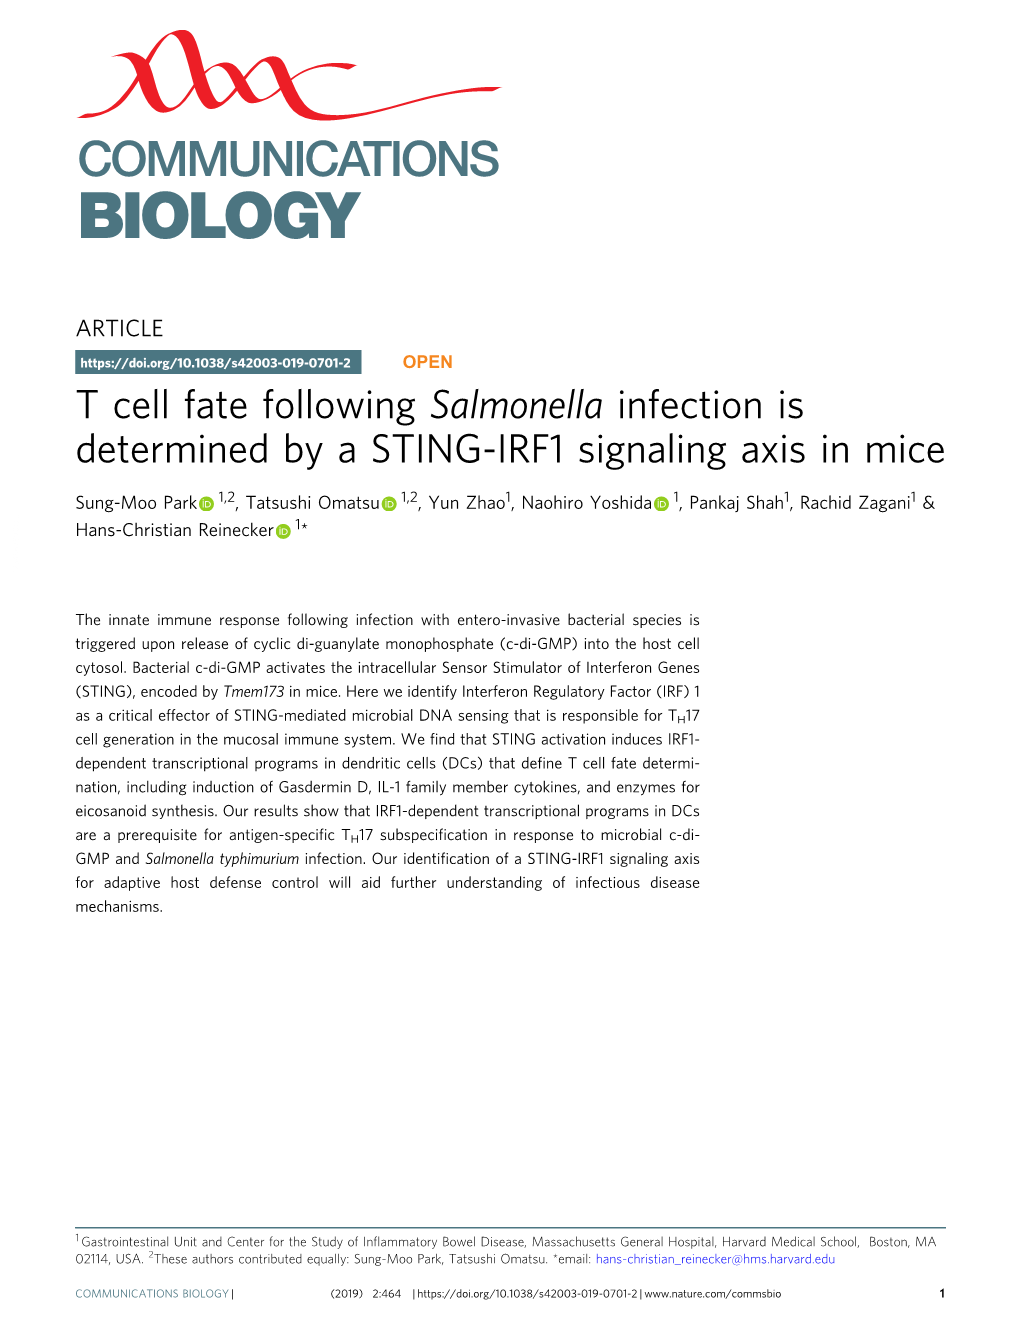 T Cell Fate Following Salmonella Infection Is Determined by a STING-IRF1 Signaling Axis in Mice